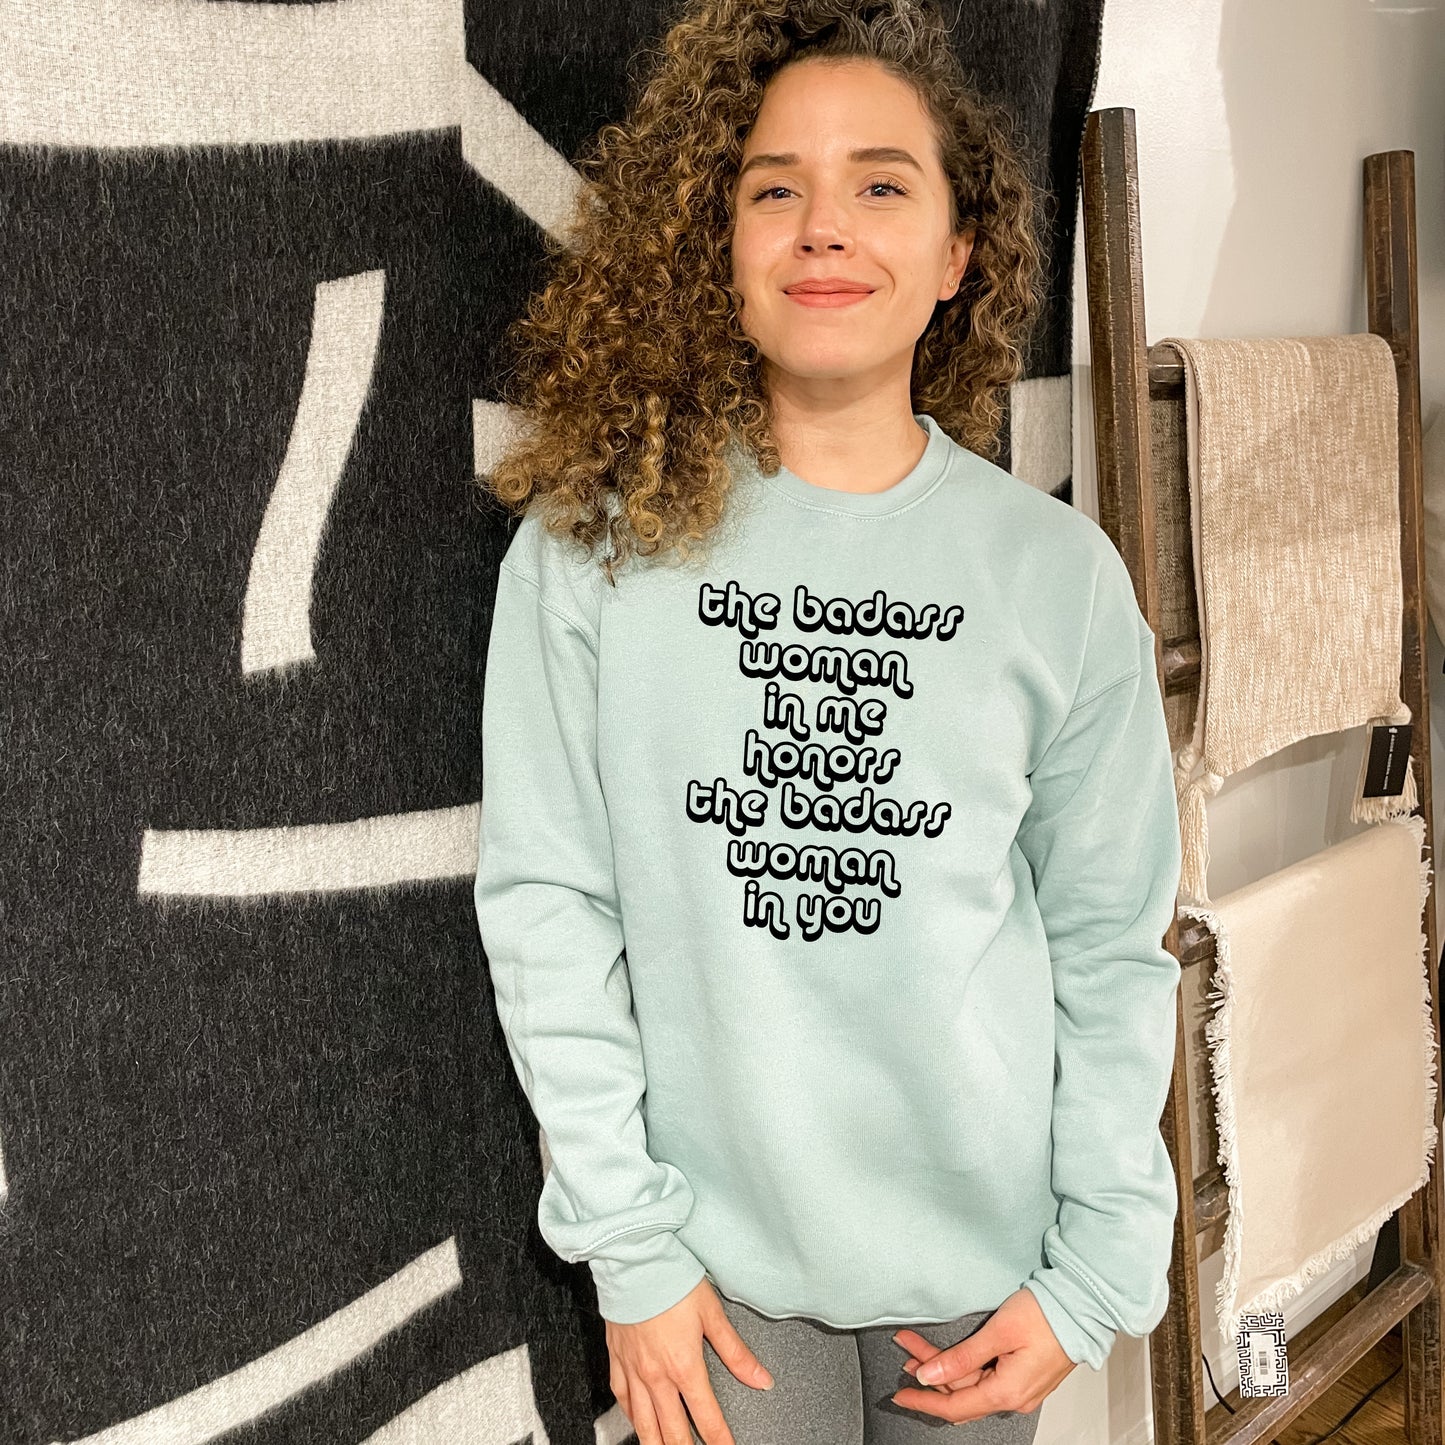 The Badass Woman in Me Honors the Badass Woman in You - Unisex Sweatshirt - Heather Gray or Dusty Blue